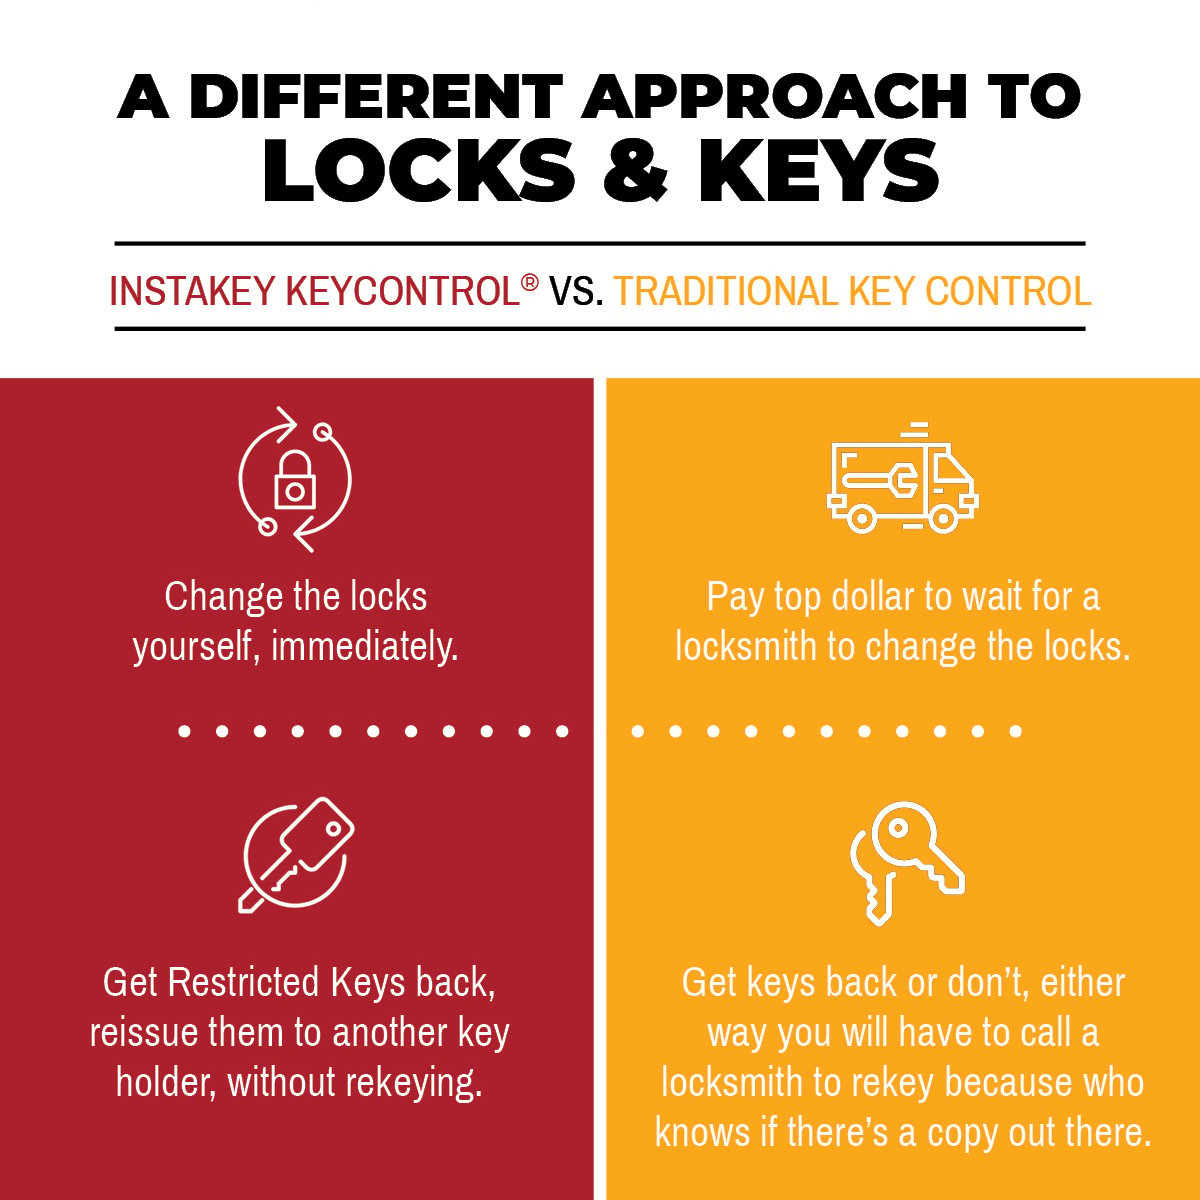 InstaKey: A Different Approach to Locks and Keys